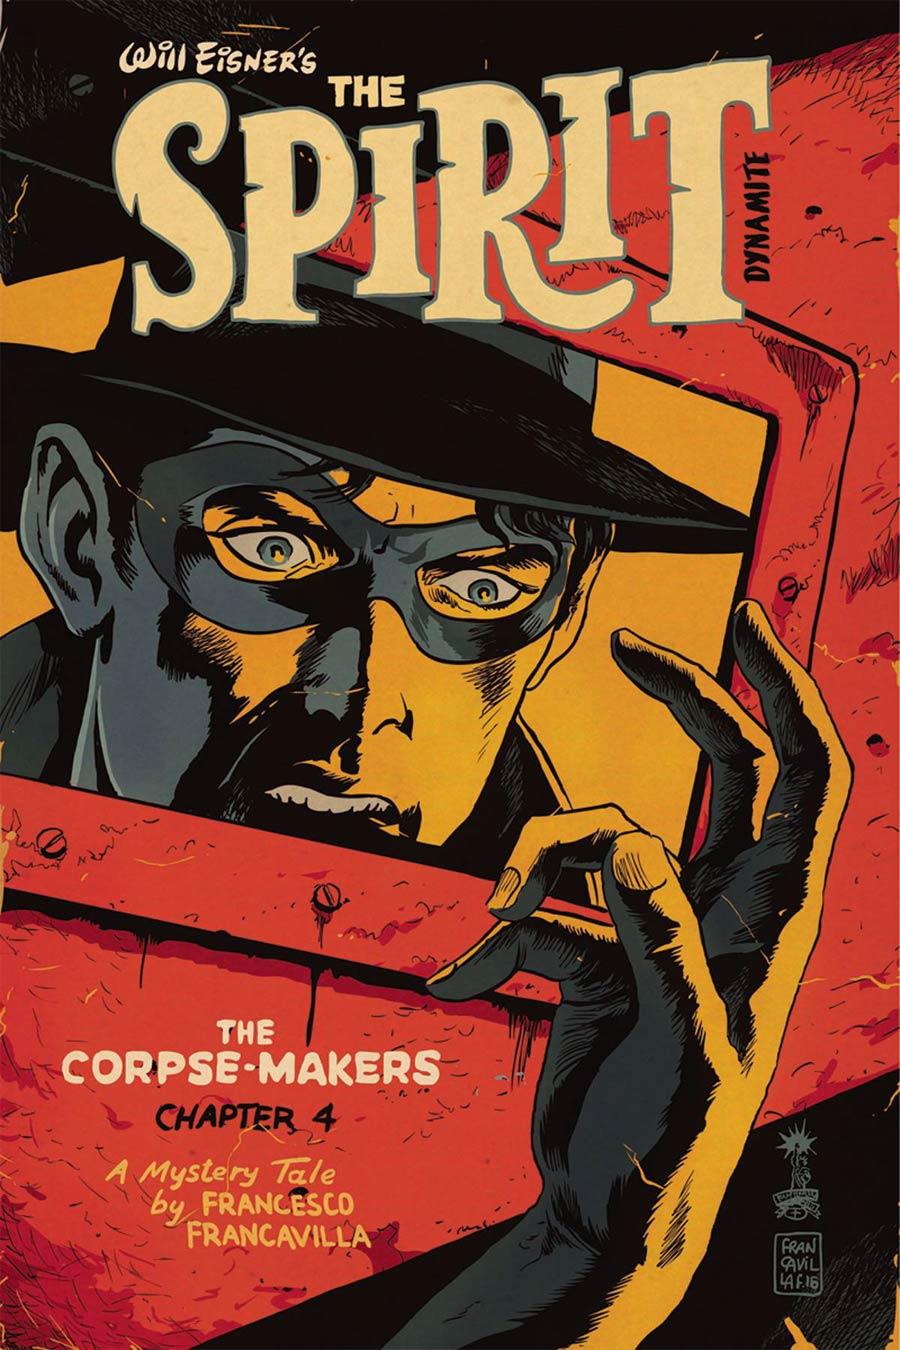 Will Eisners Spirit Corpse-Makers Vol. 1 #4